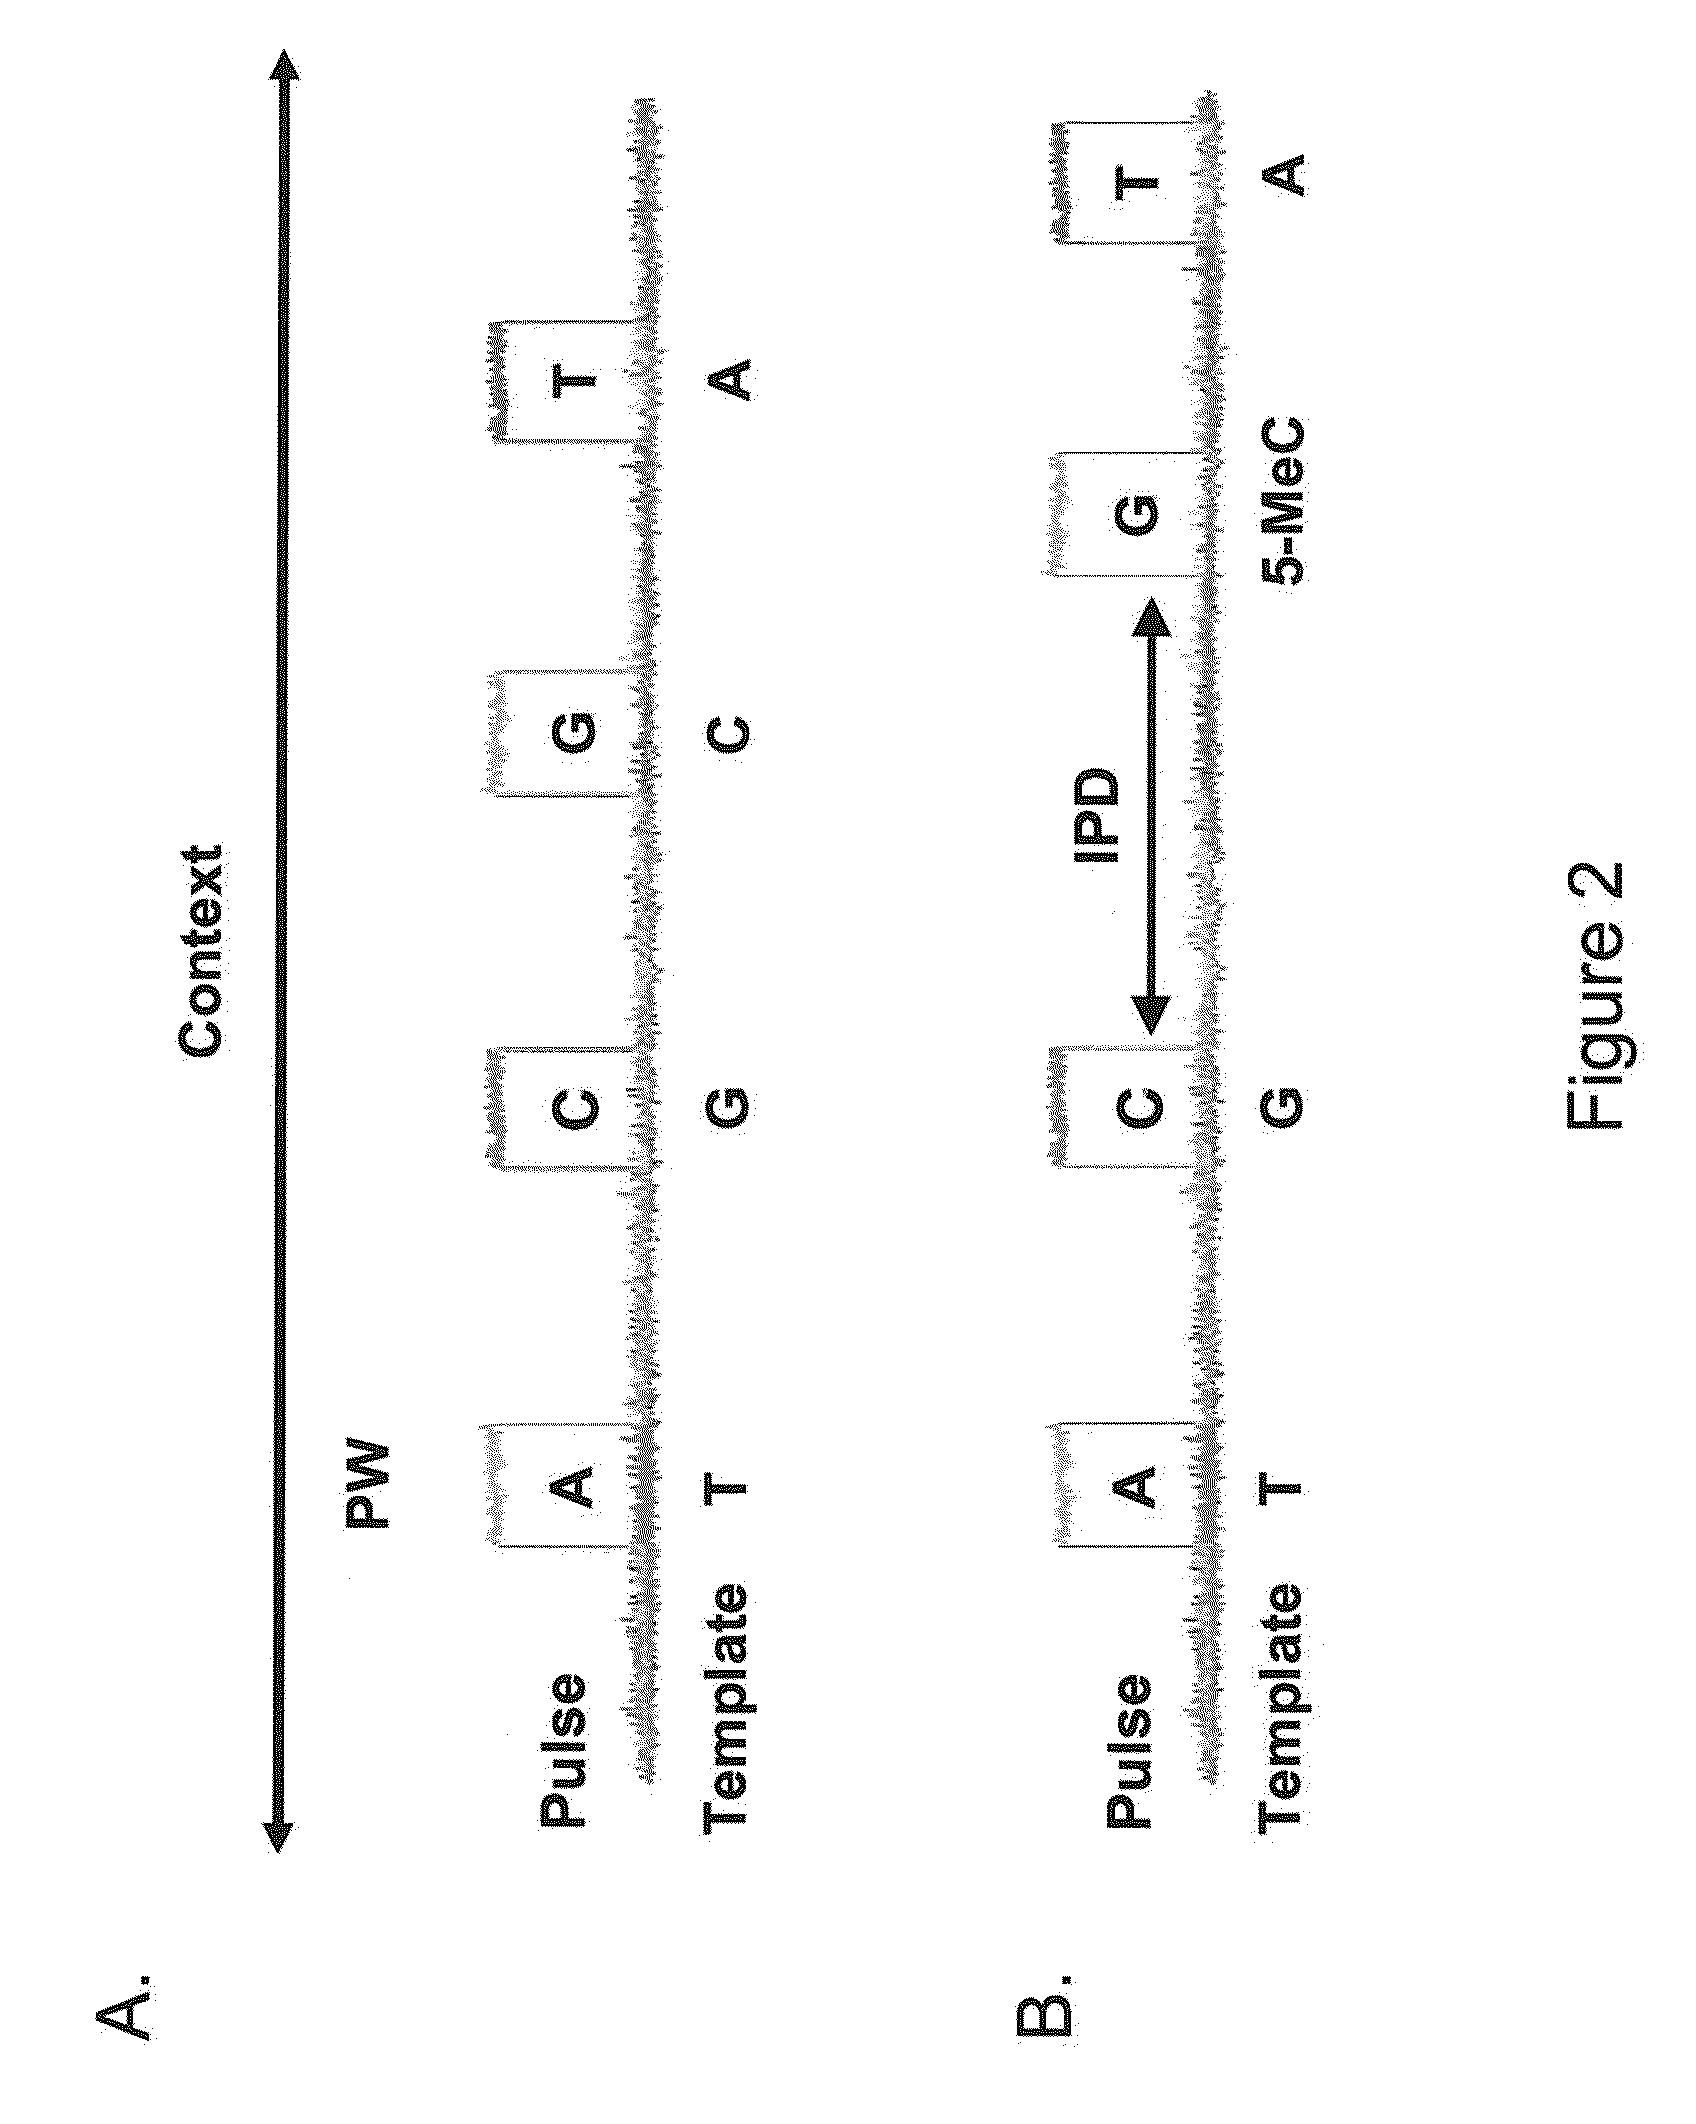 Methods for identifying nucleic acid modifications